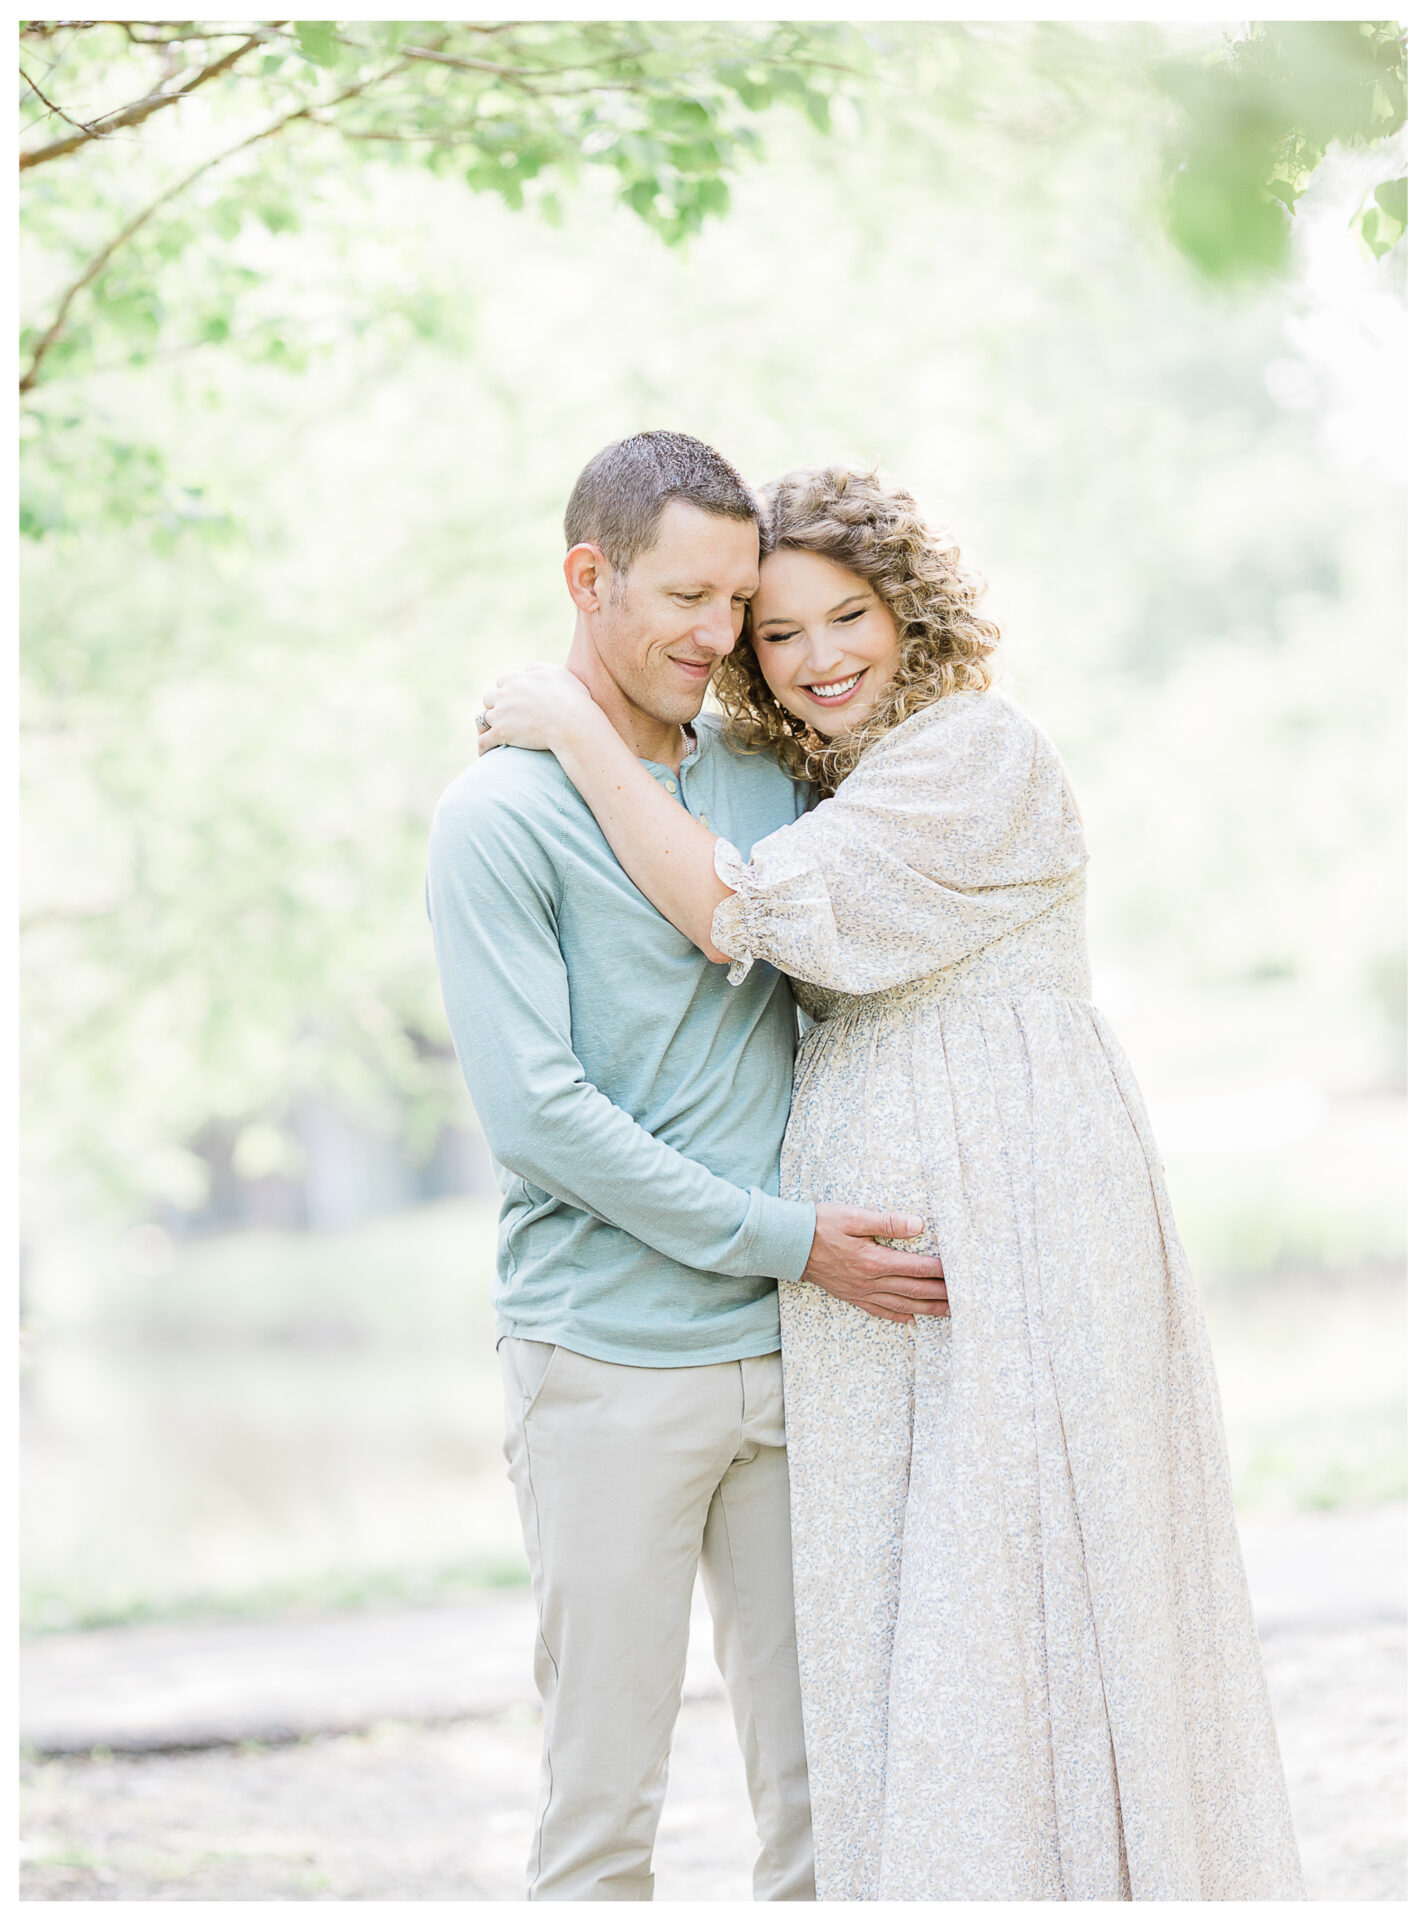 Winter Freire Photography | maternity session outdoors | wife smiing at camera while husband closes his eyes and hugs her